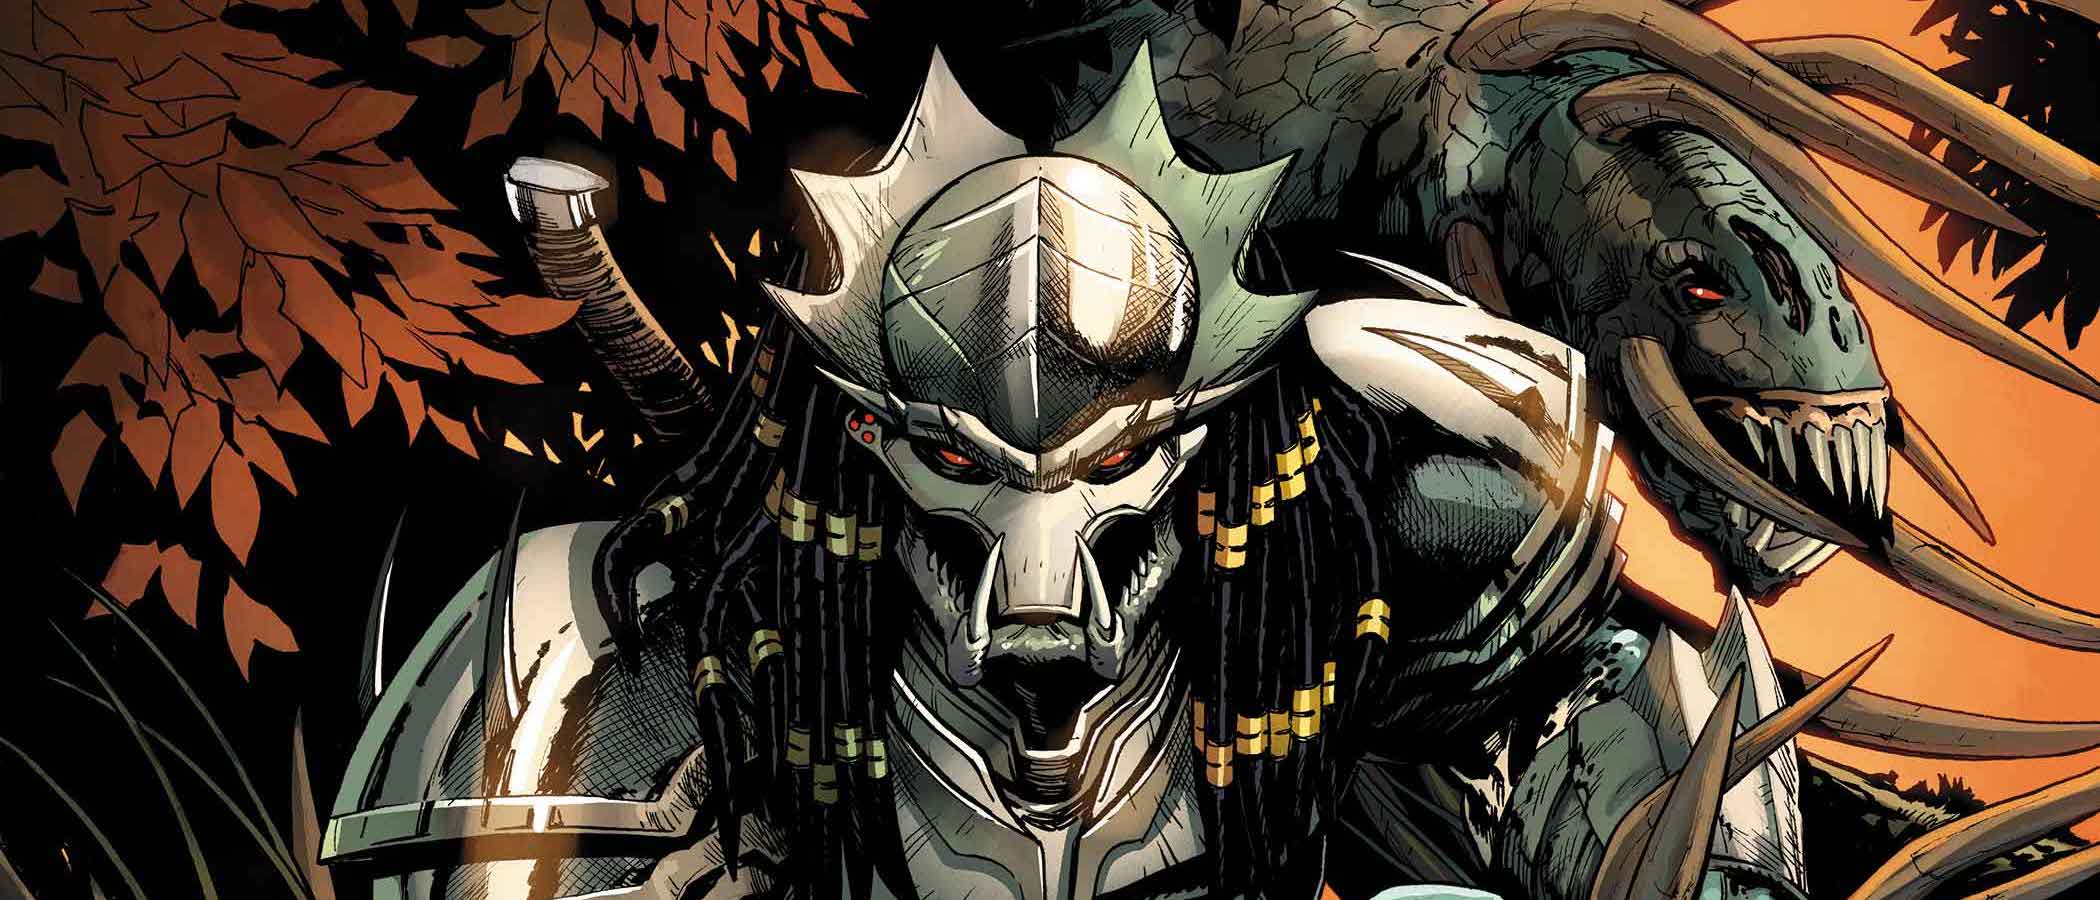 'Predator: The Last Hunt' #1 sets up a strong new story arc